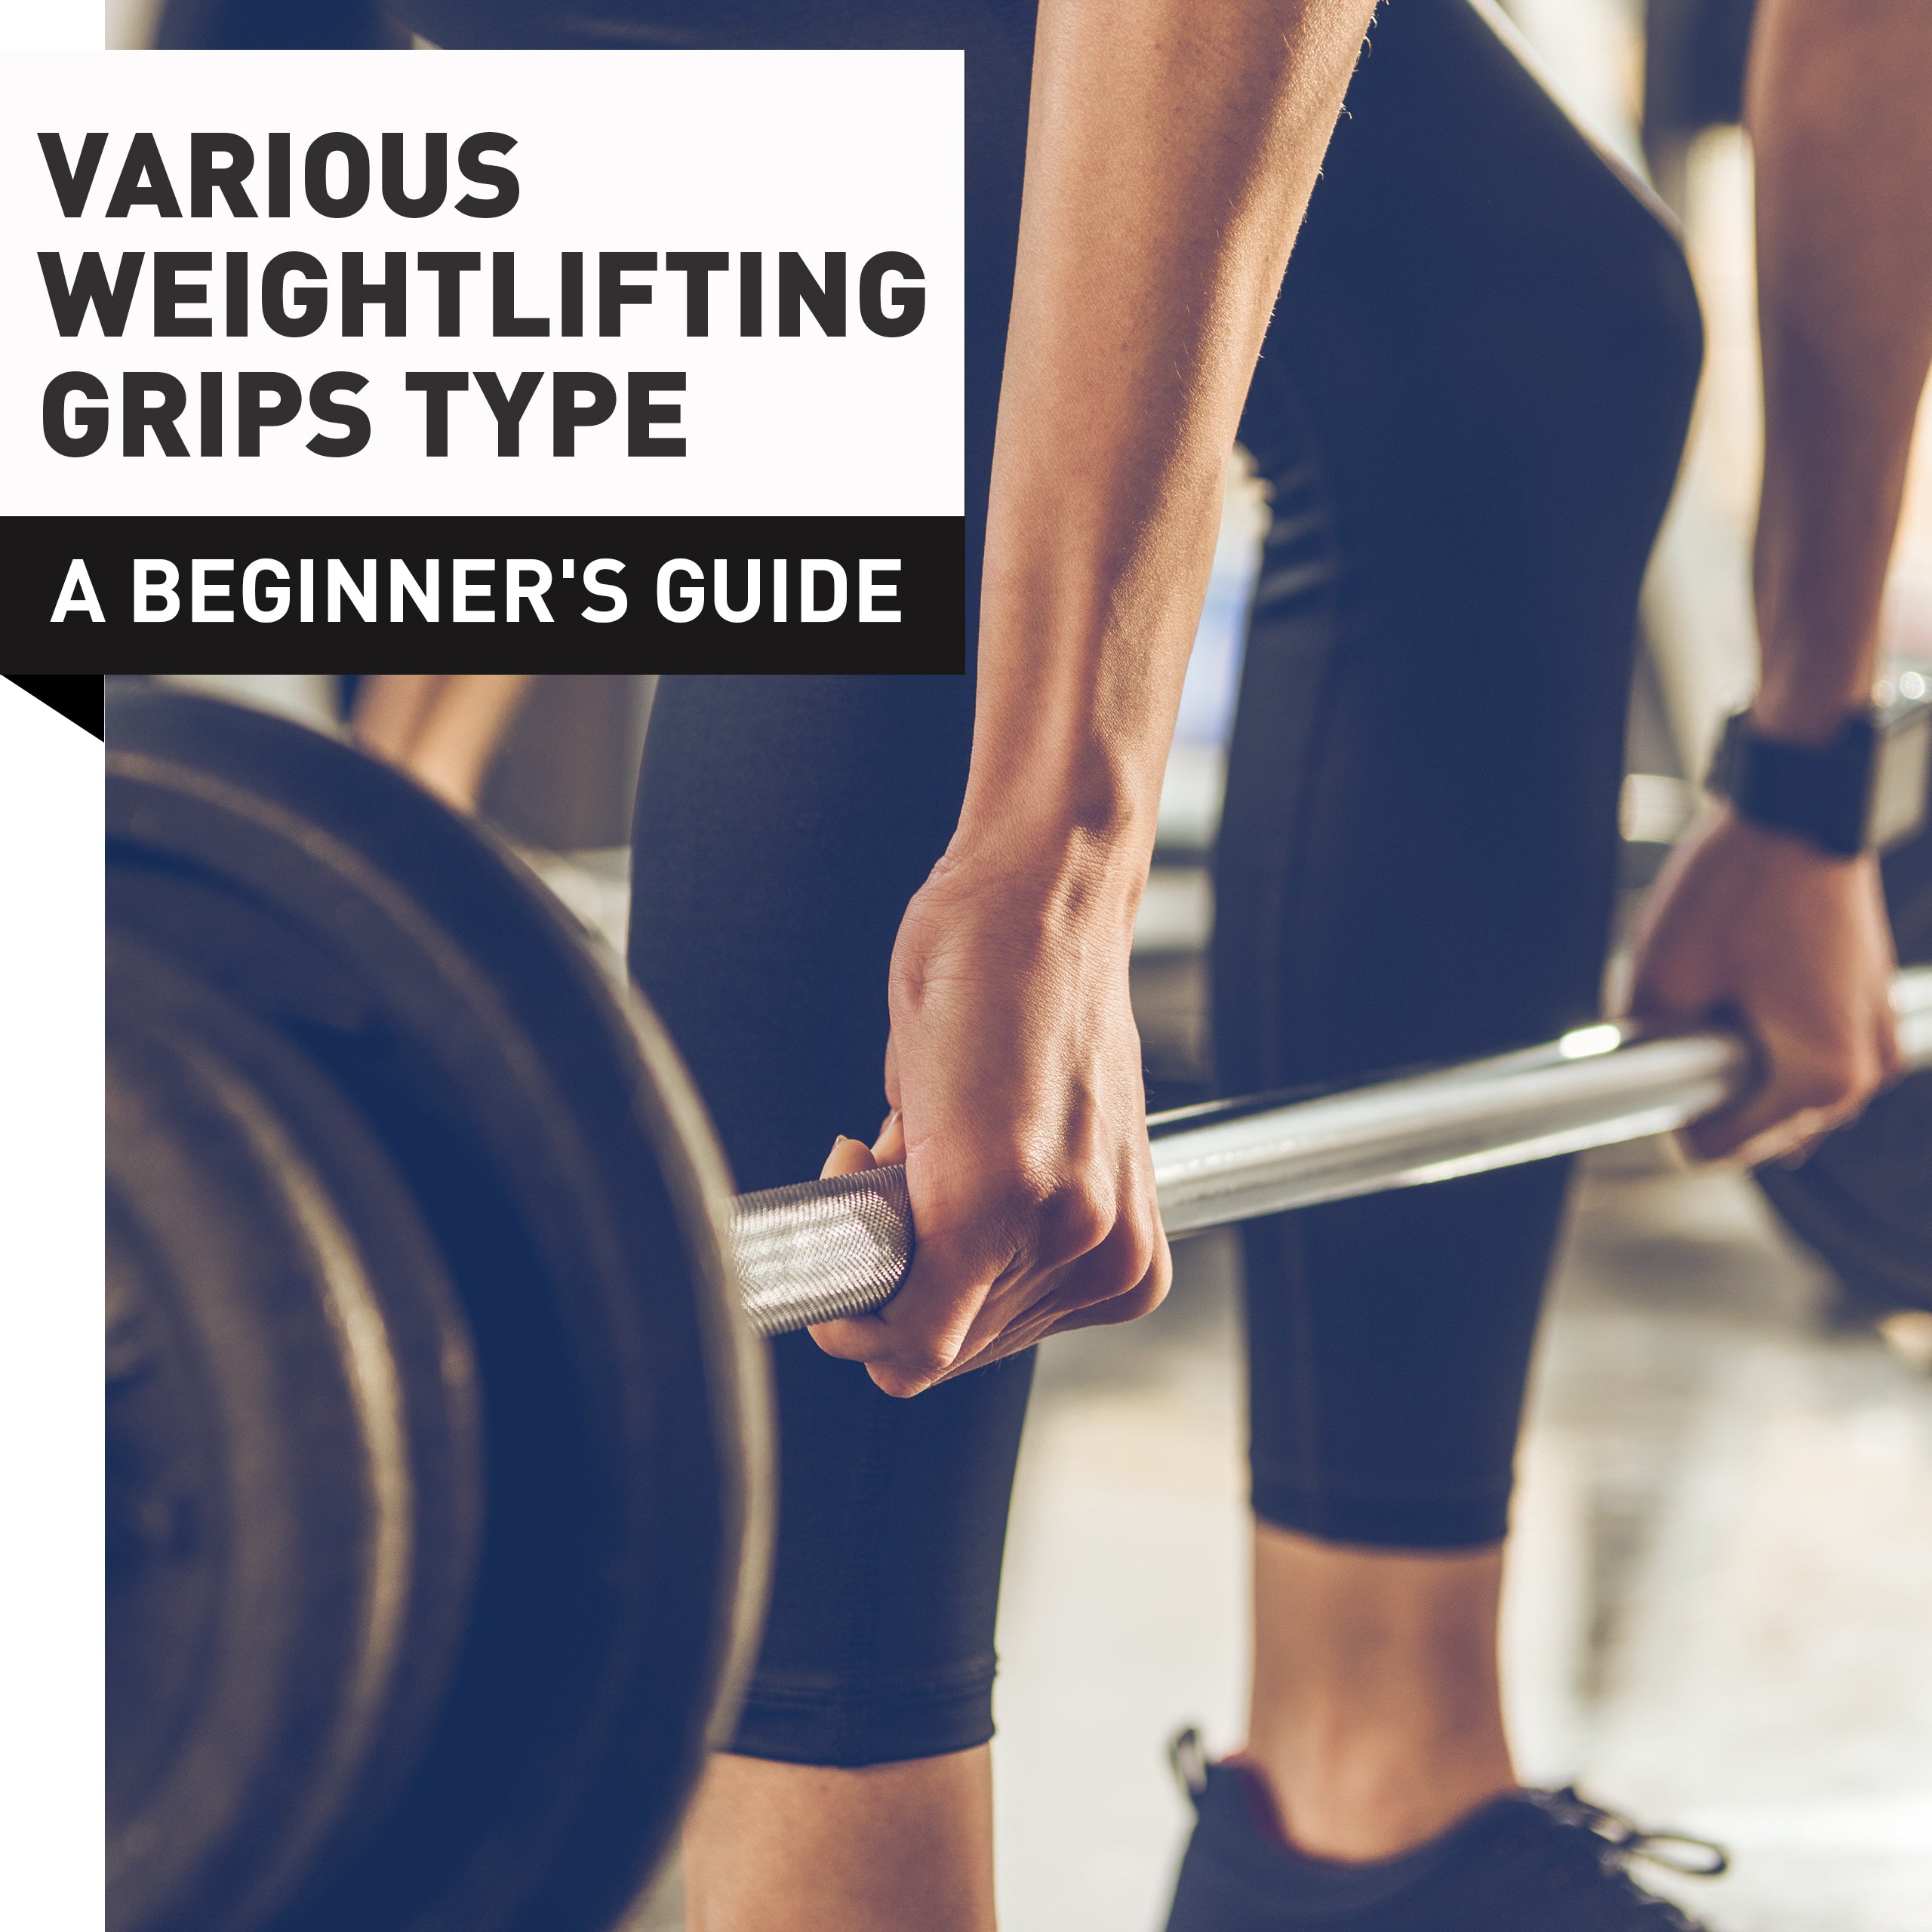 10 Different Types of Exercises For Beginners - Nordic Lifting